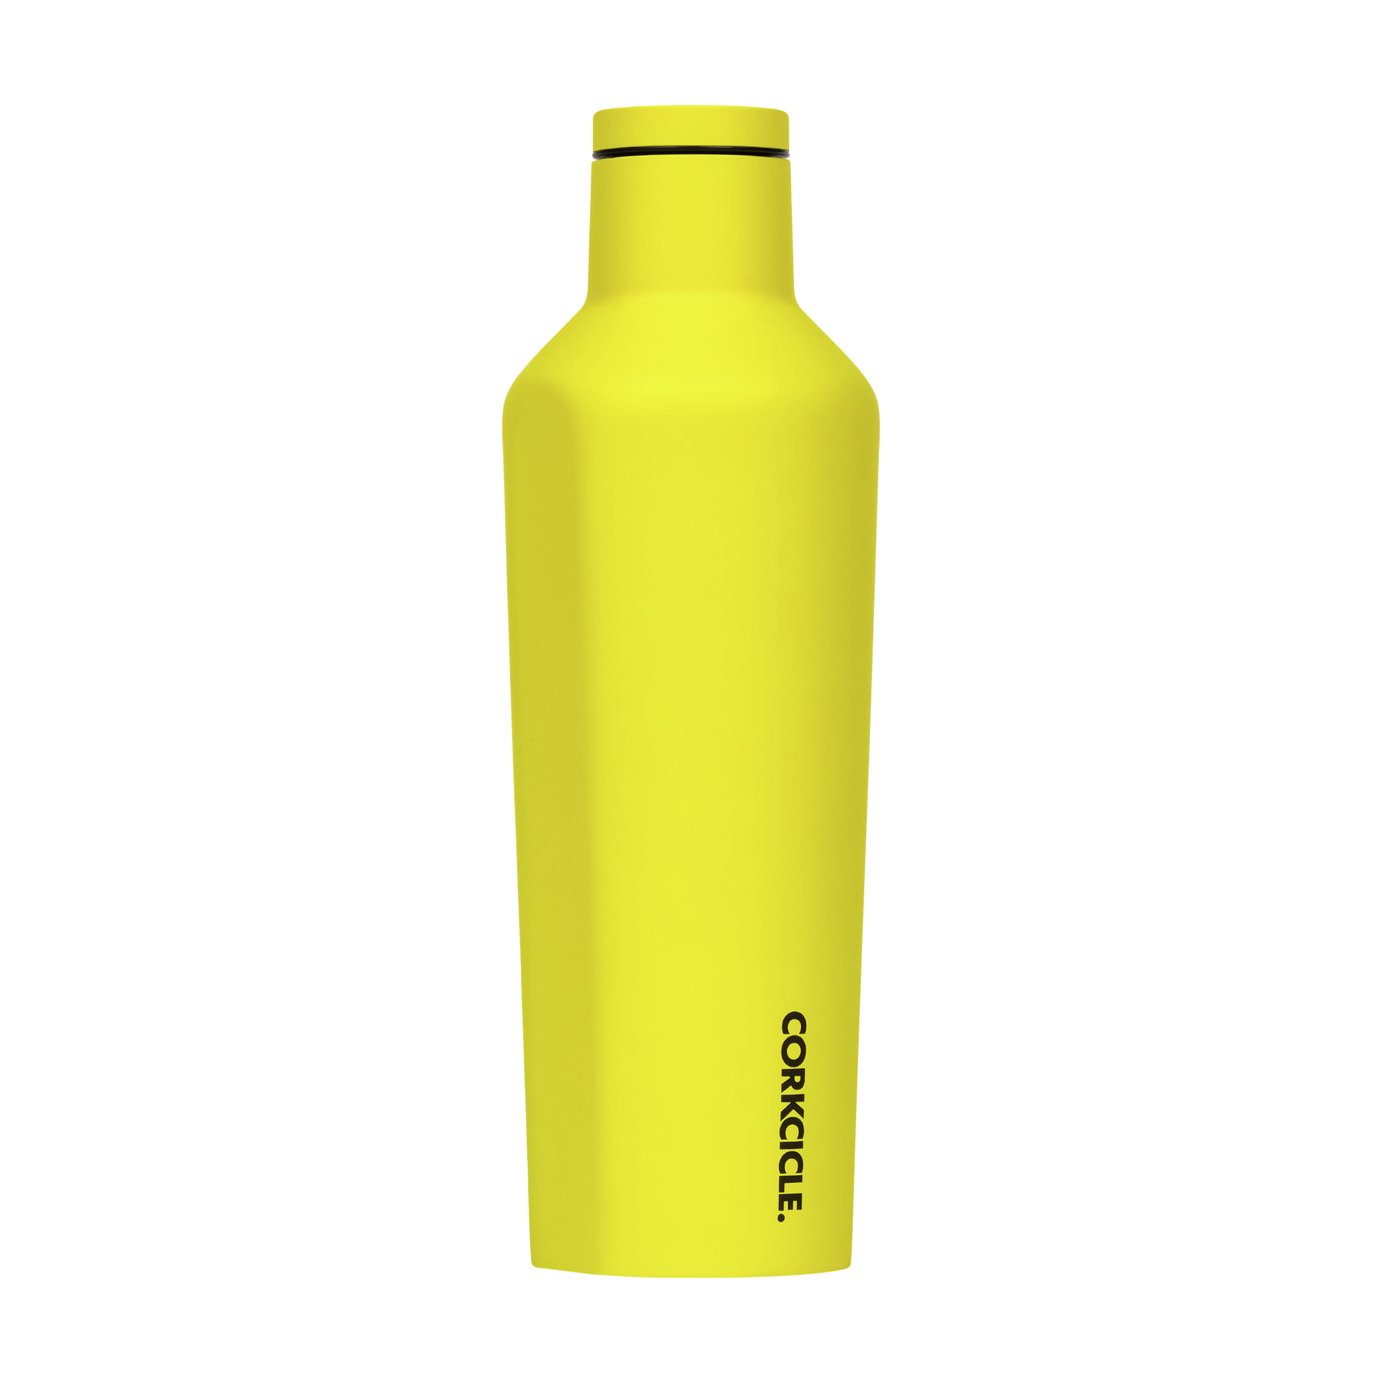 Corkcicle Neon Yellow Stainless Steel Canteen - 475ml